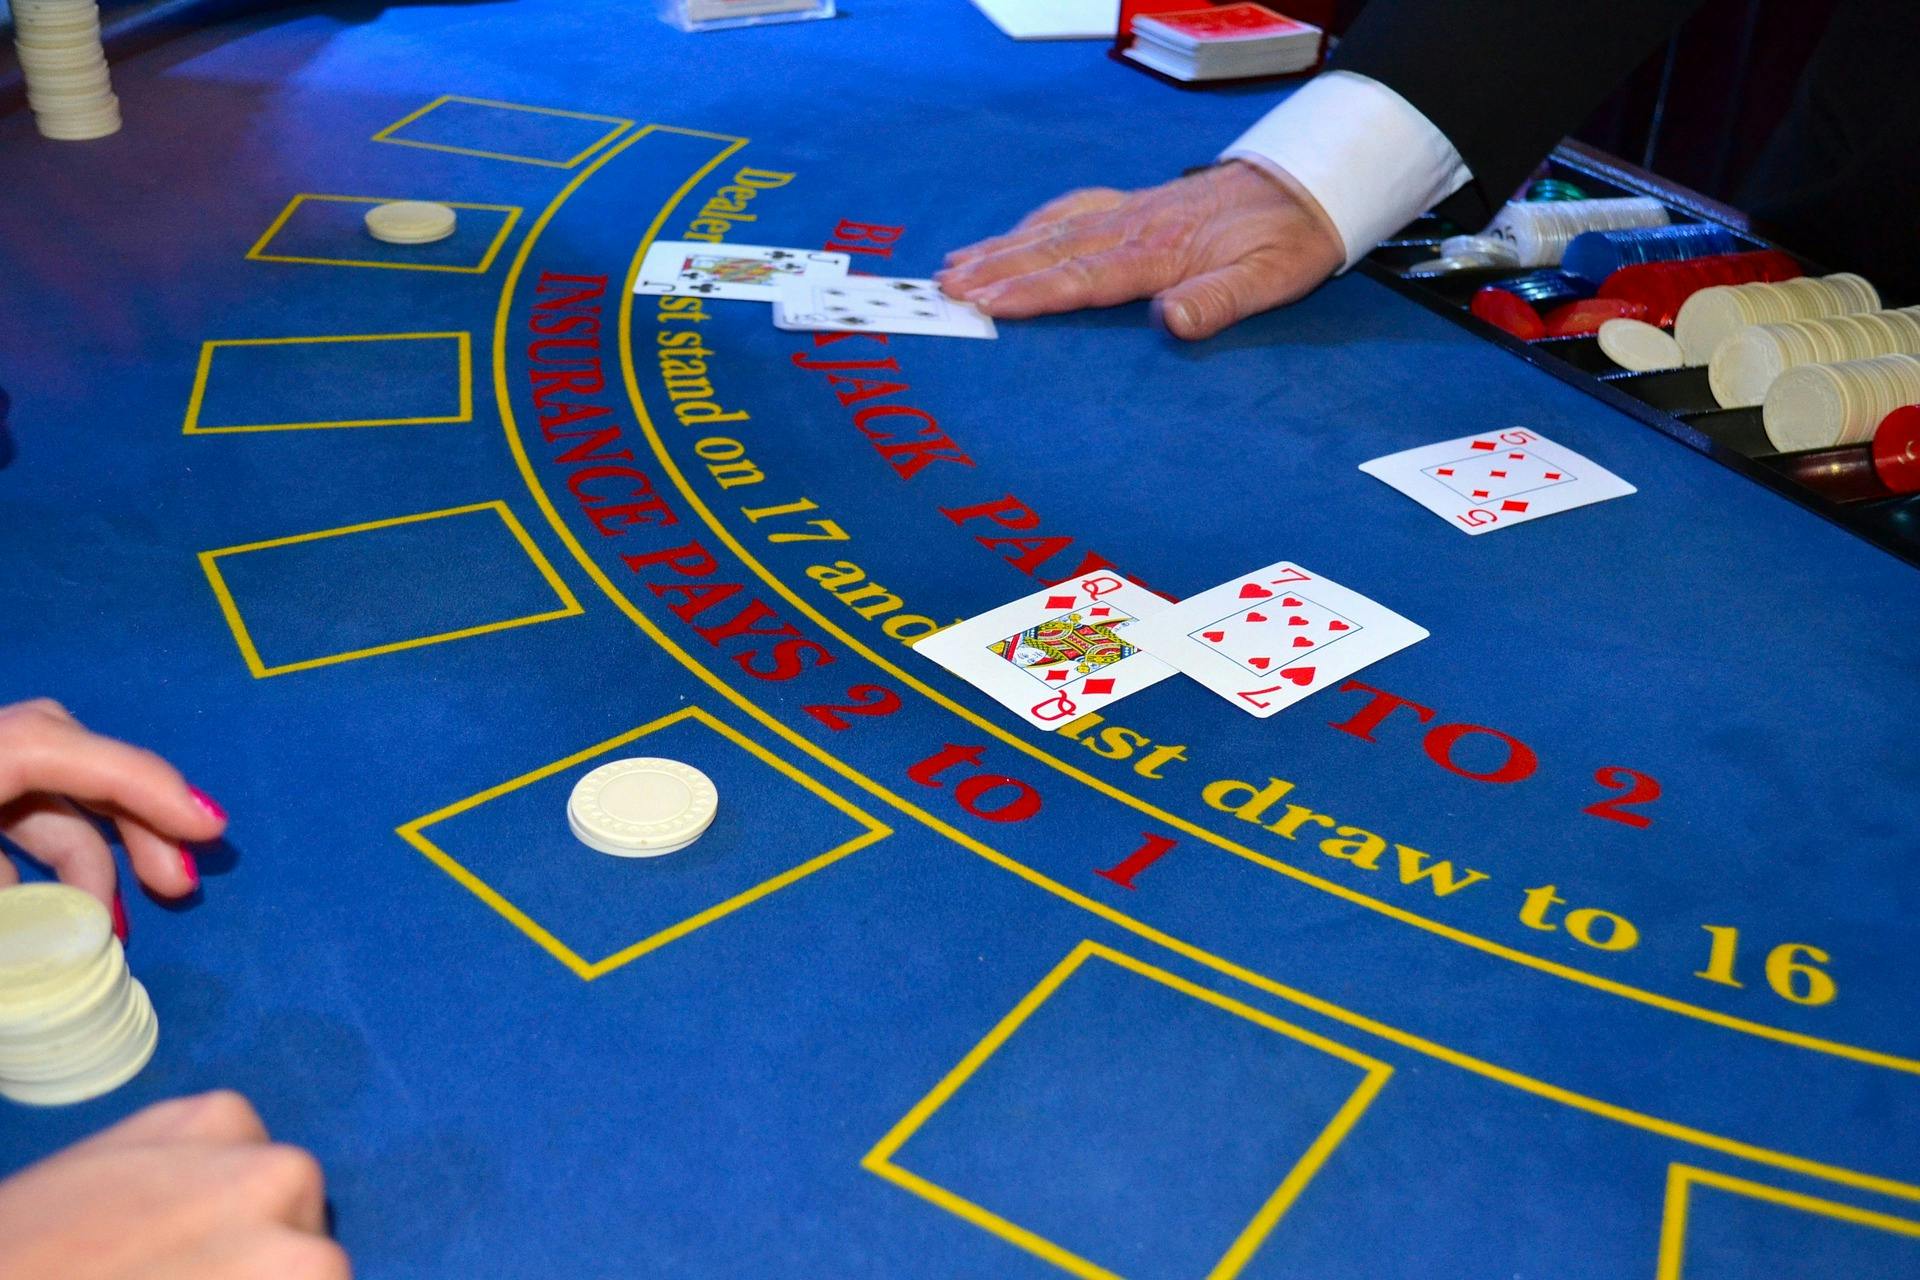 Using card counting when playing blackjack at online casinos